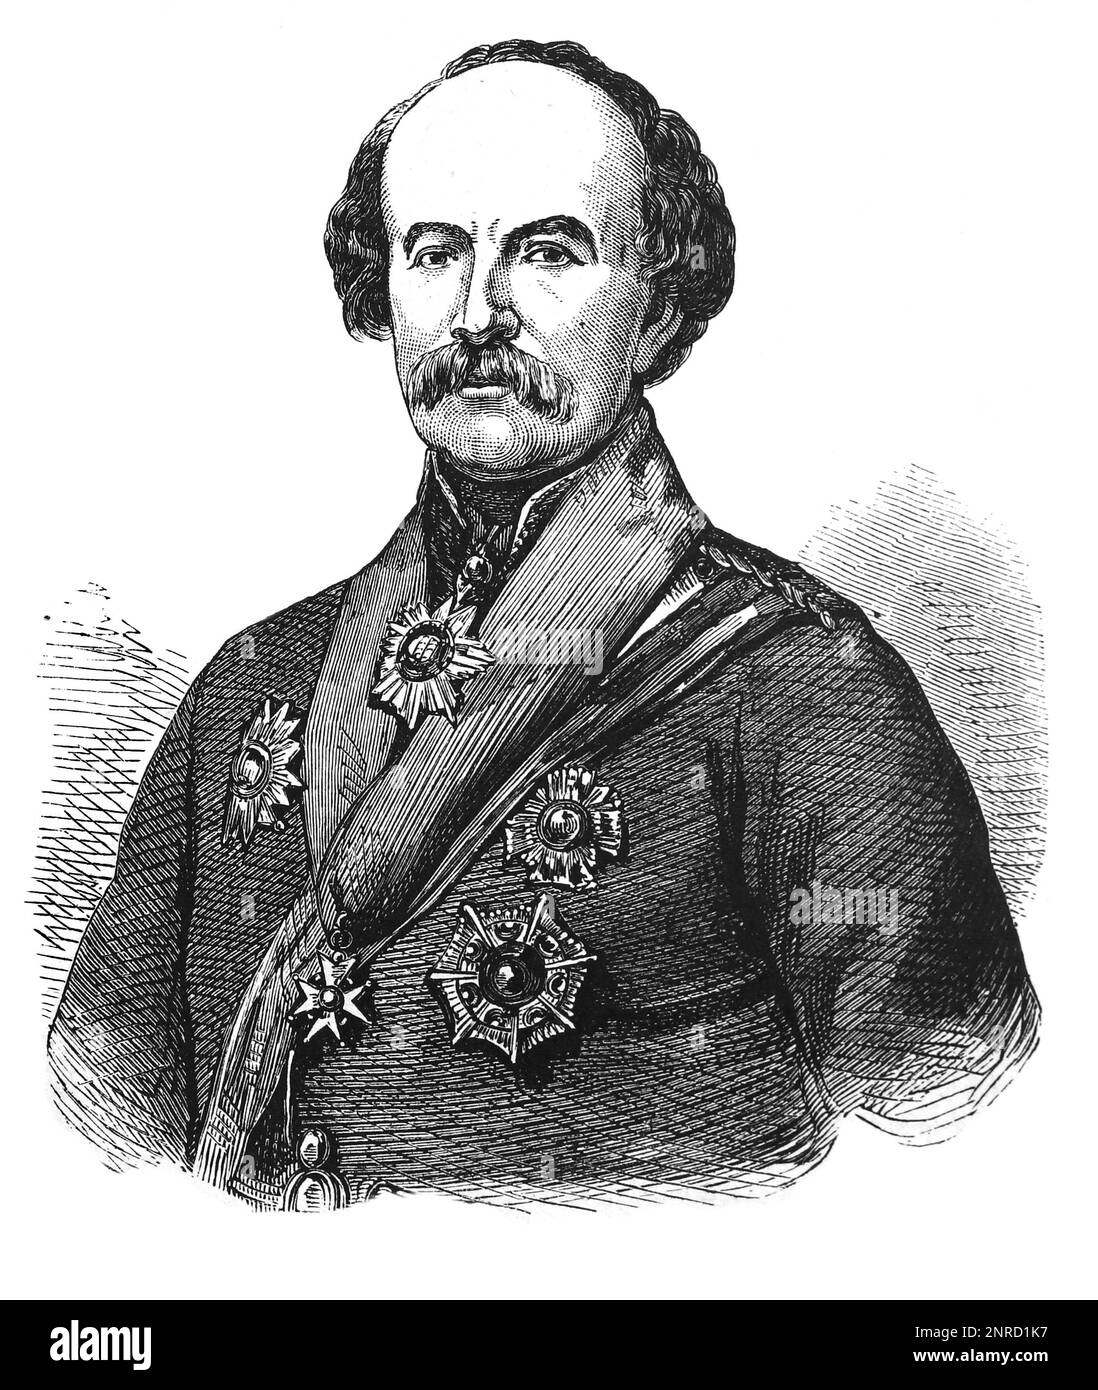 Portrait of General Sir William Fenwick Williams, 1st Baronet, a Nova Scotian and British Army General. He is remembered for his defence of the town of Kars during the Crimean War of 1853 to 1855. Black and White Illustration Stock Photo